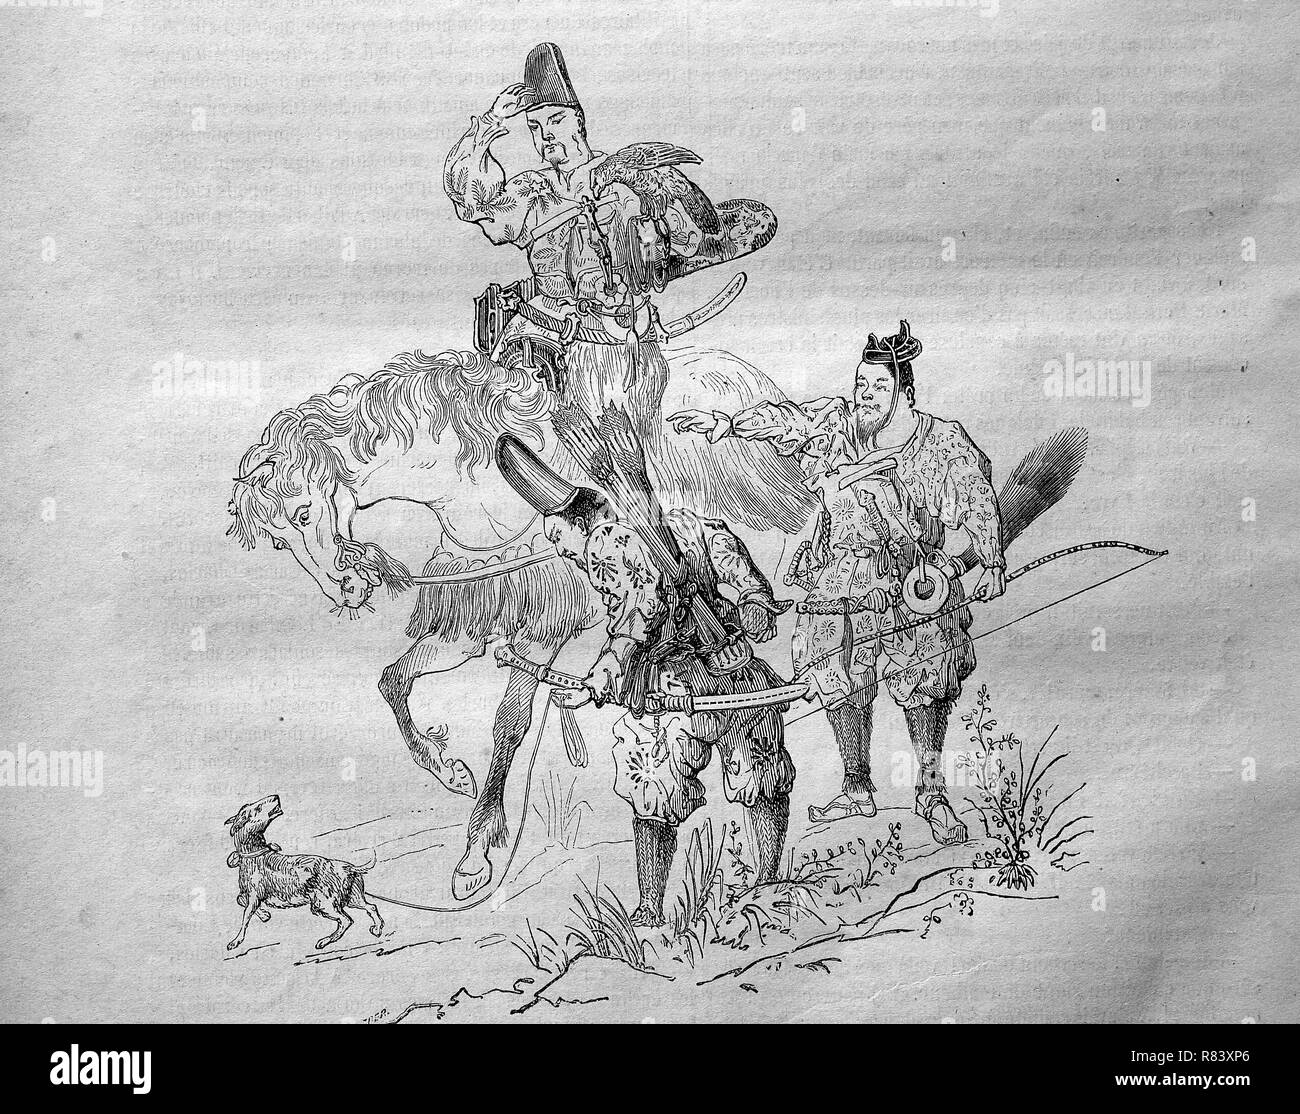 Digital improved reproduction, japanese Chasseurs, soldiers armed with bow and arrows, japanische Soldaten mit Pfeil und Bogen bewaffnet, from an original print from the year 1855 Stock Photo